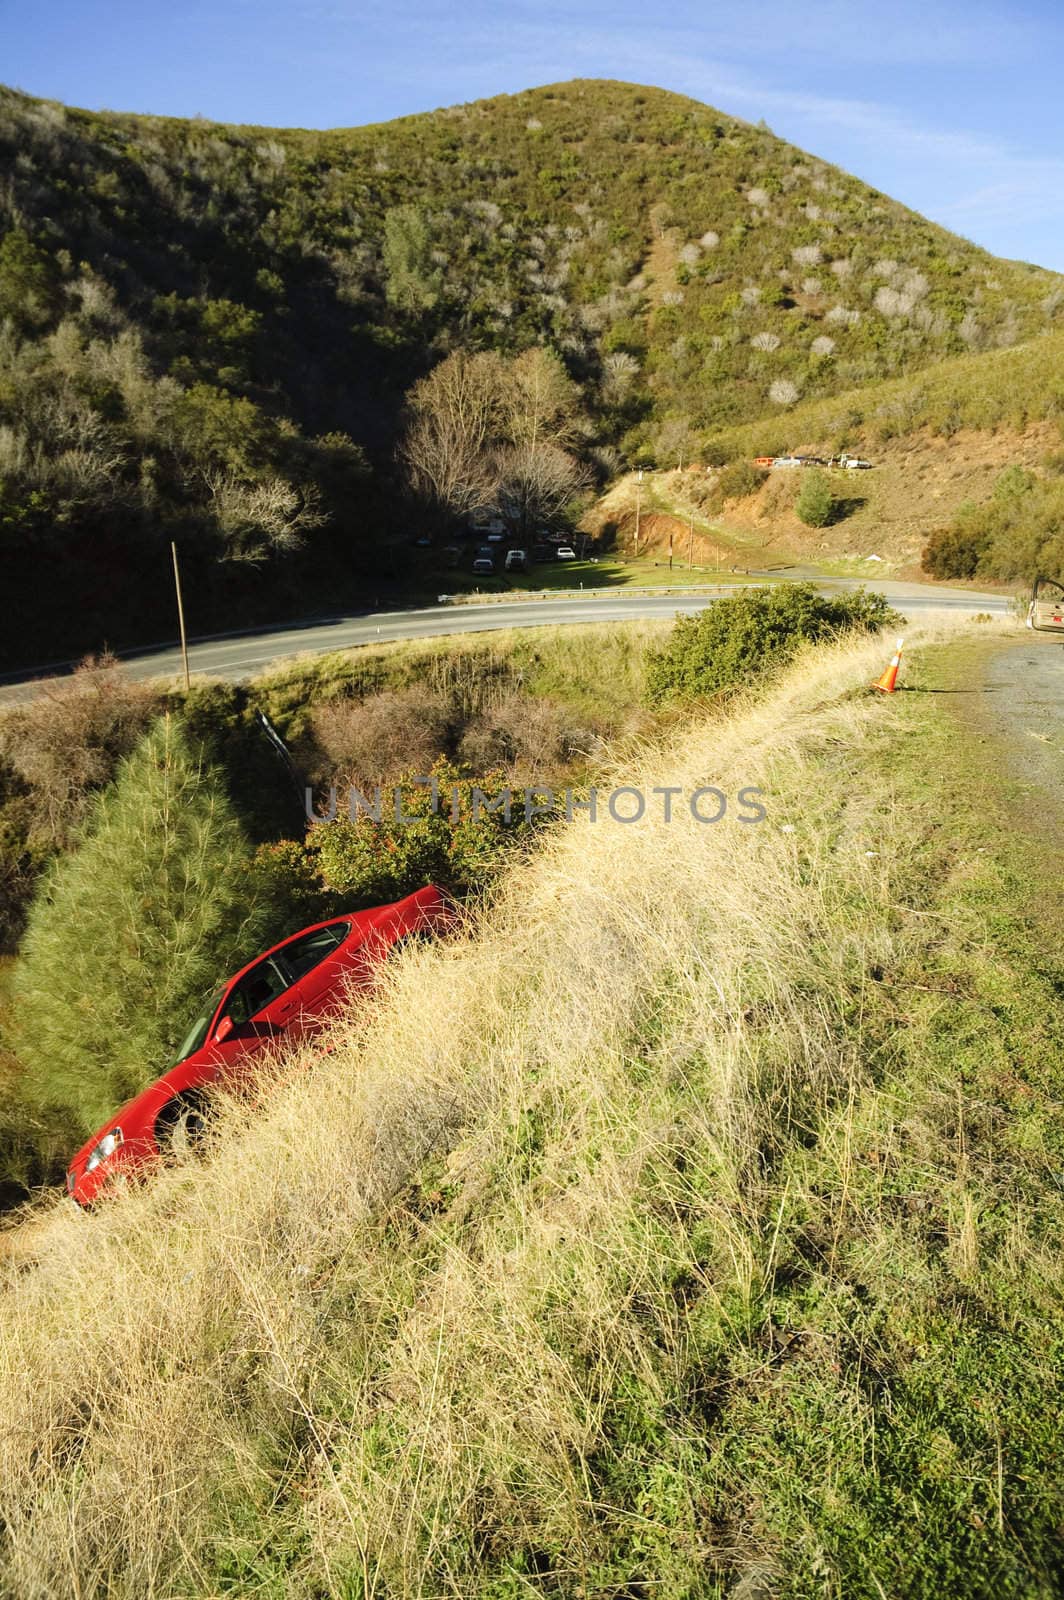 Car slid off the road and down a slope in Northern california